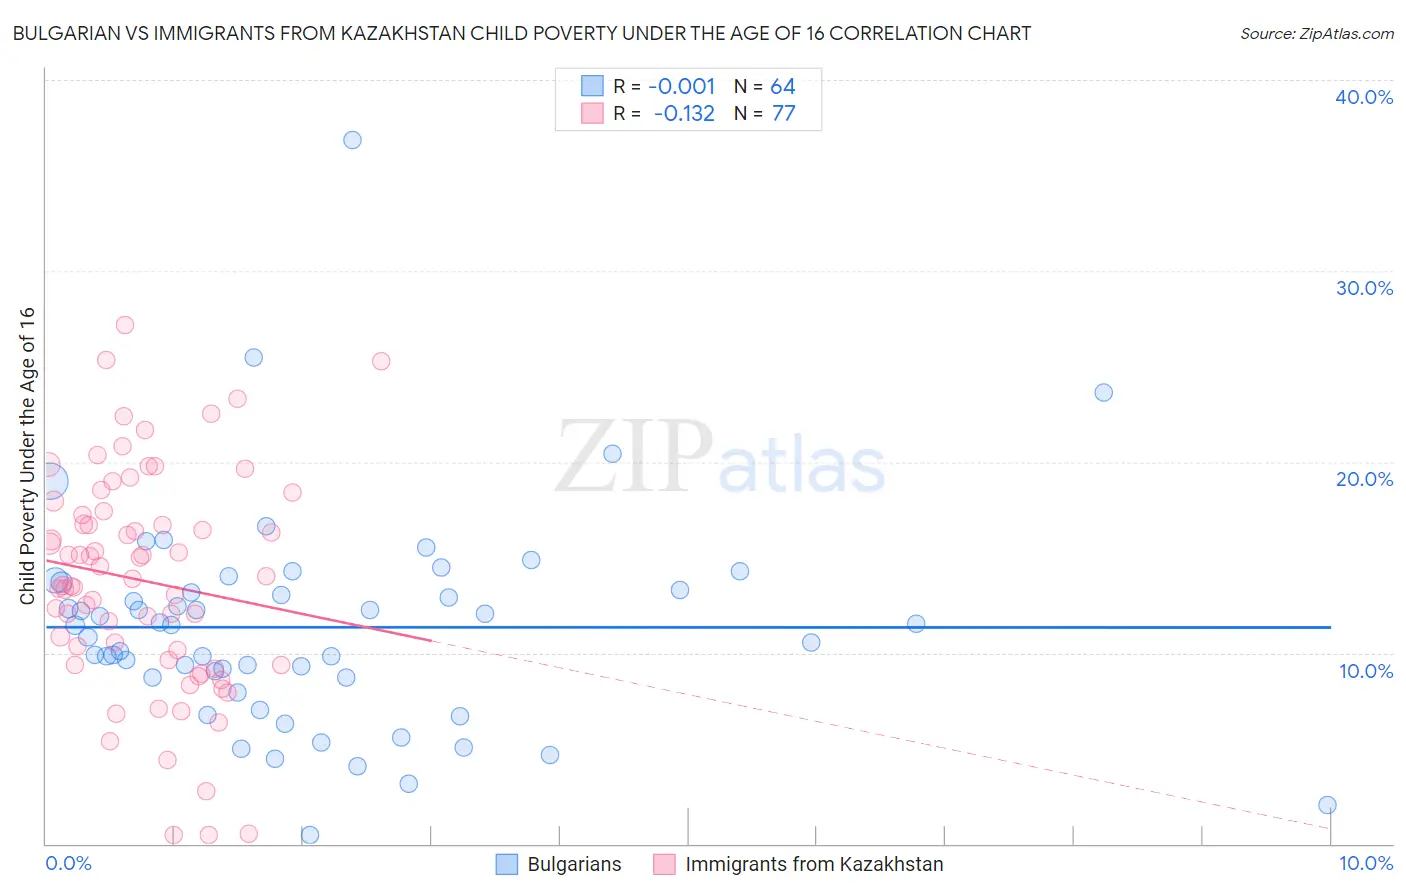 Bulgarian vs Immigrants from Kazakhstan Child Poverty Under the Age of 16